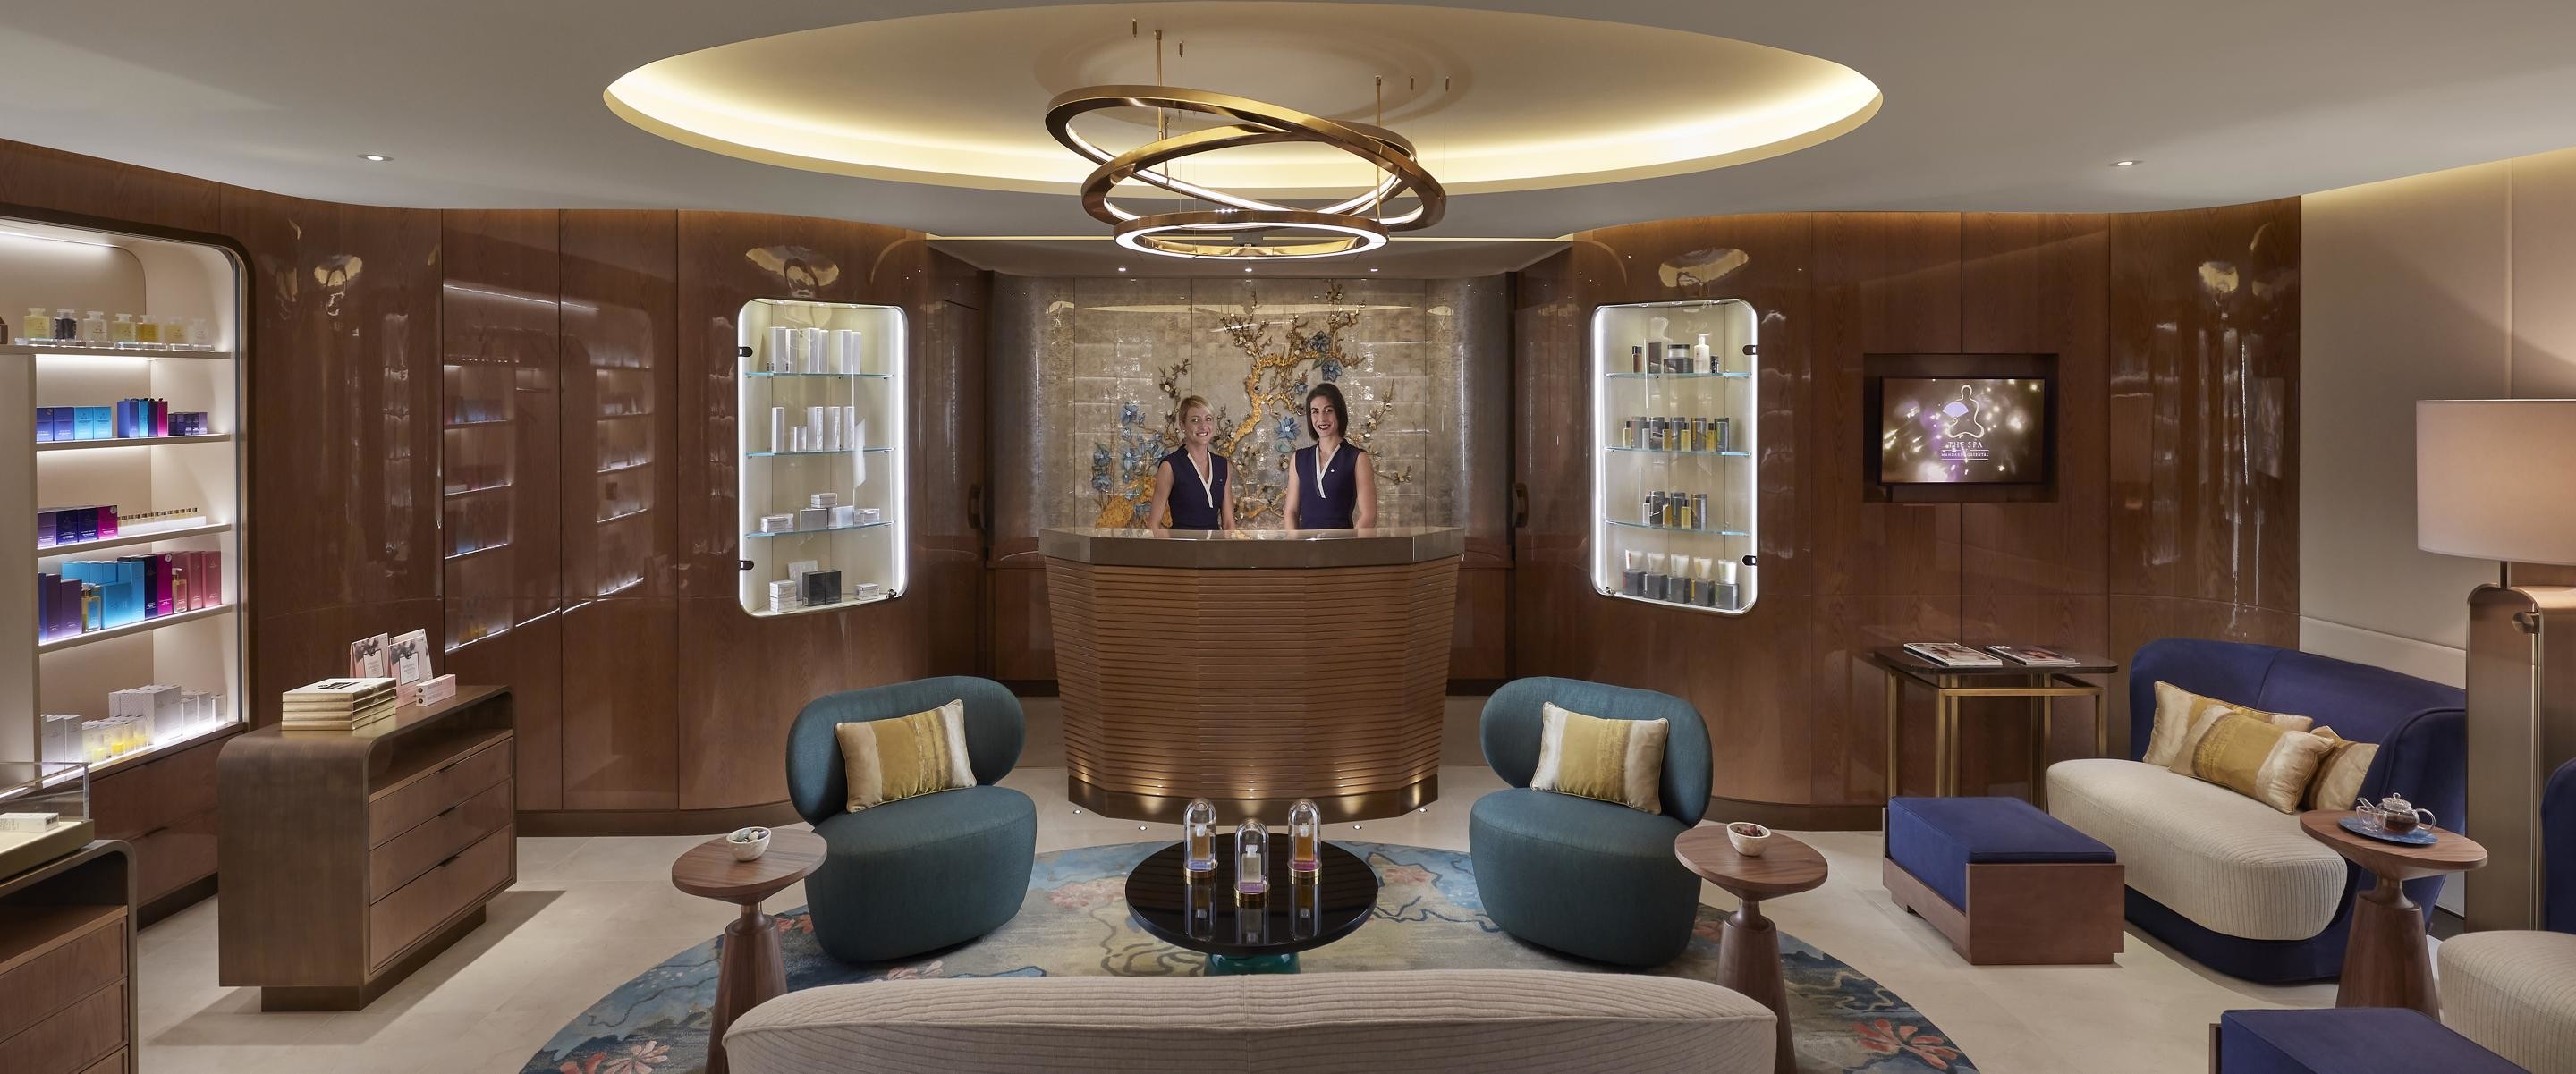 news-main-new-year-new-you-from-the-spa-at-mandarin-oriental-london.1547129887.jpg